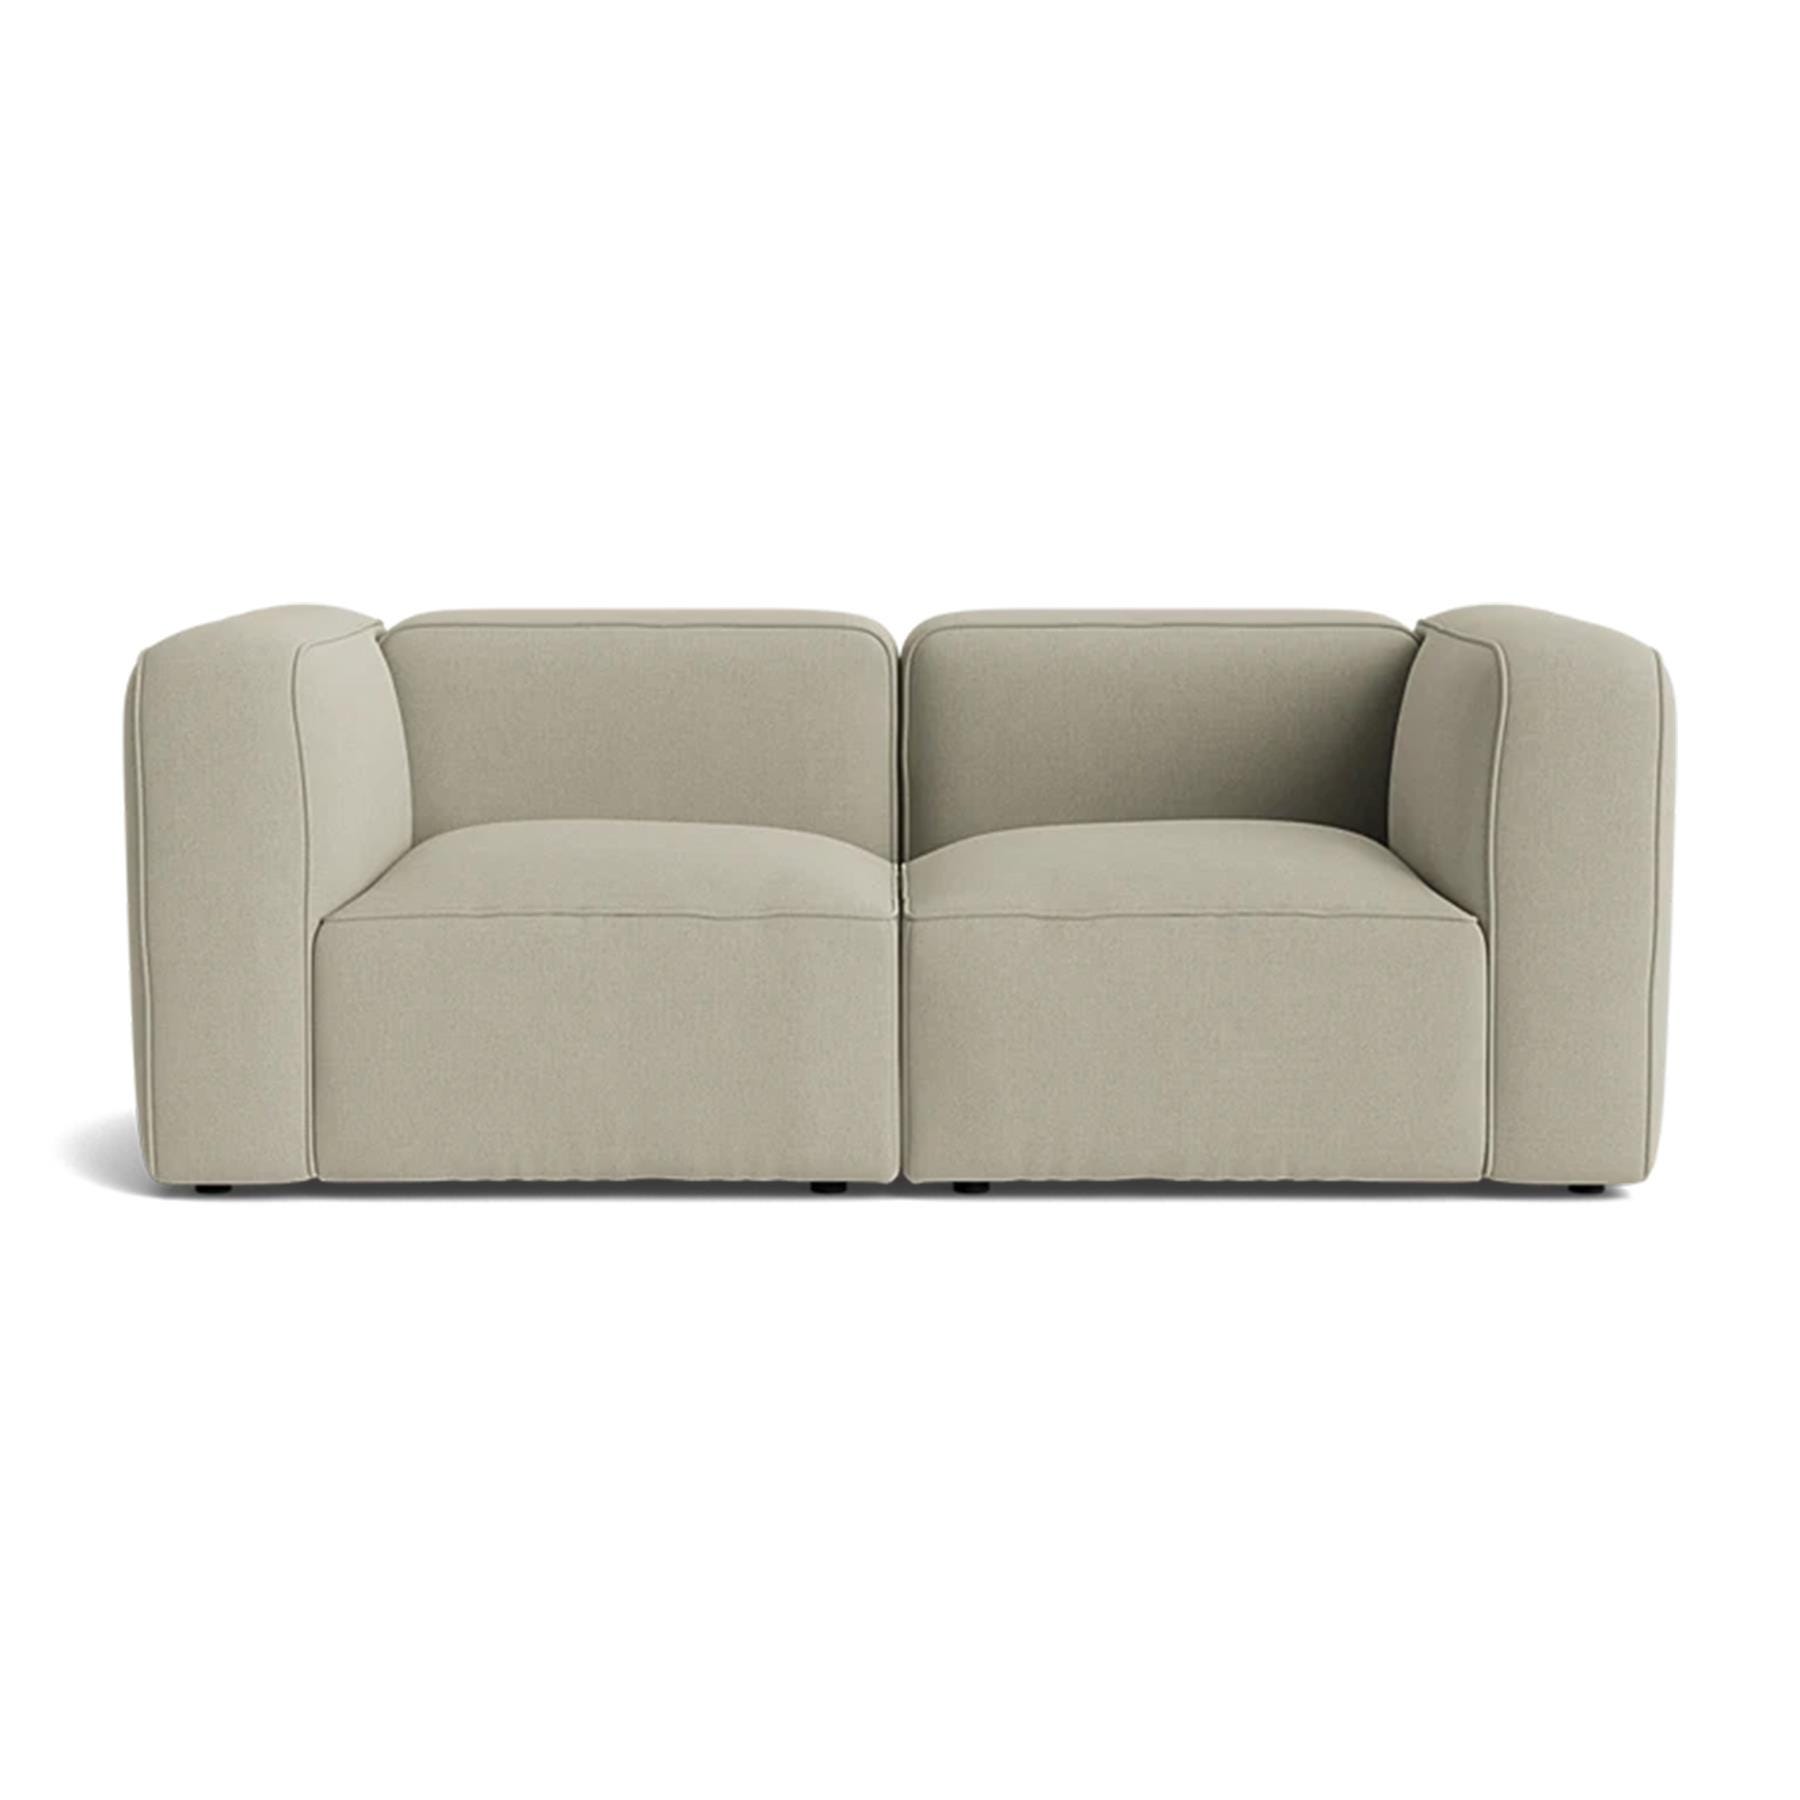 Make Nordic Basecamp 2 Seater Sofa Fiord 322 Brown Designer Furniture From Holloways Of Ludlow